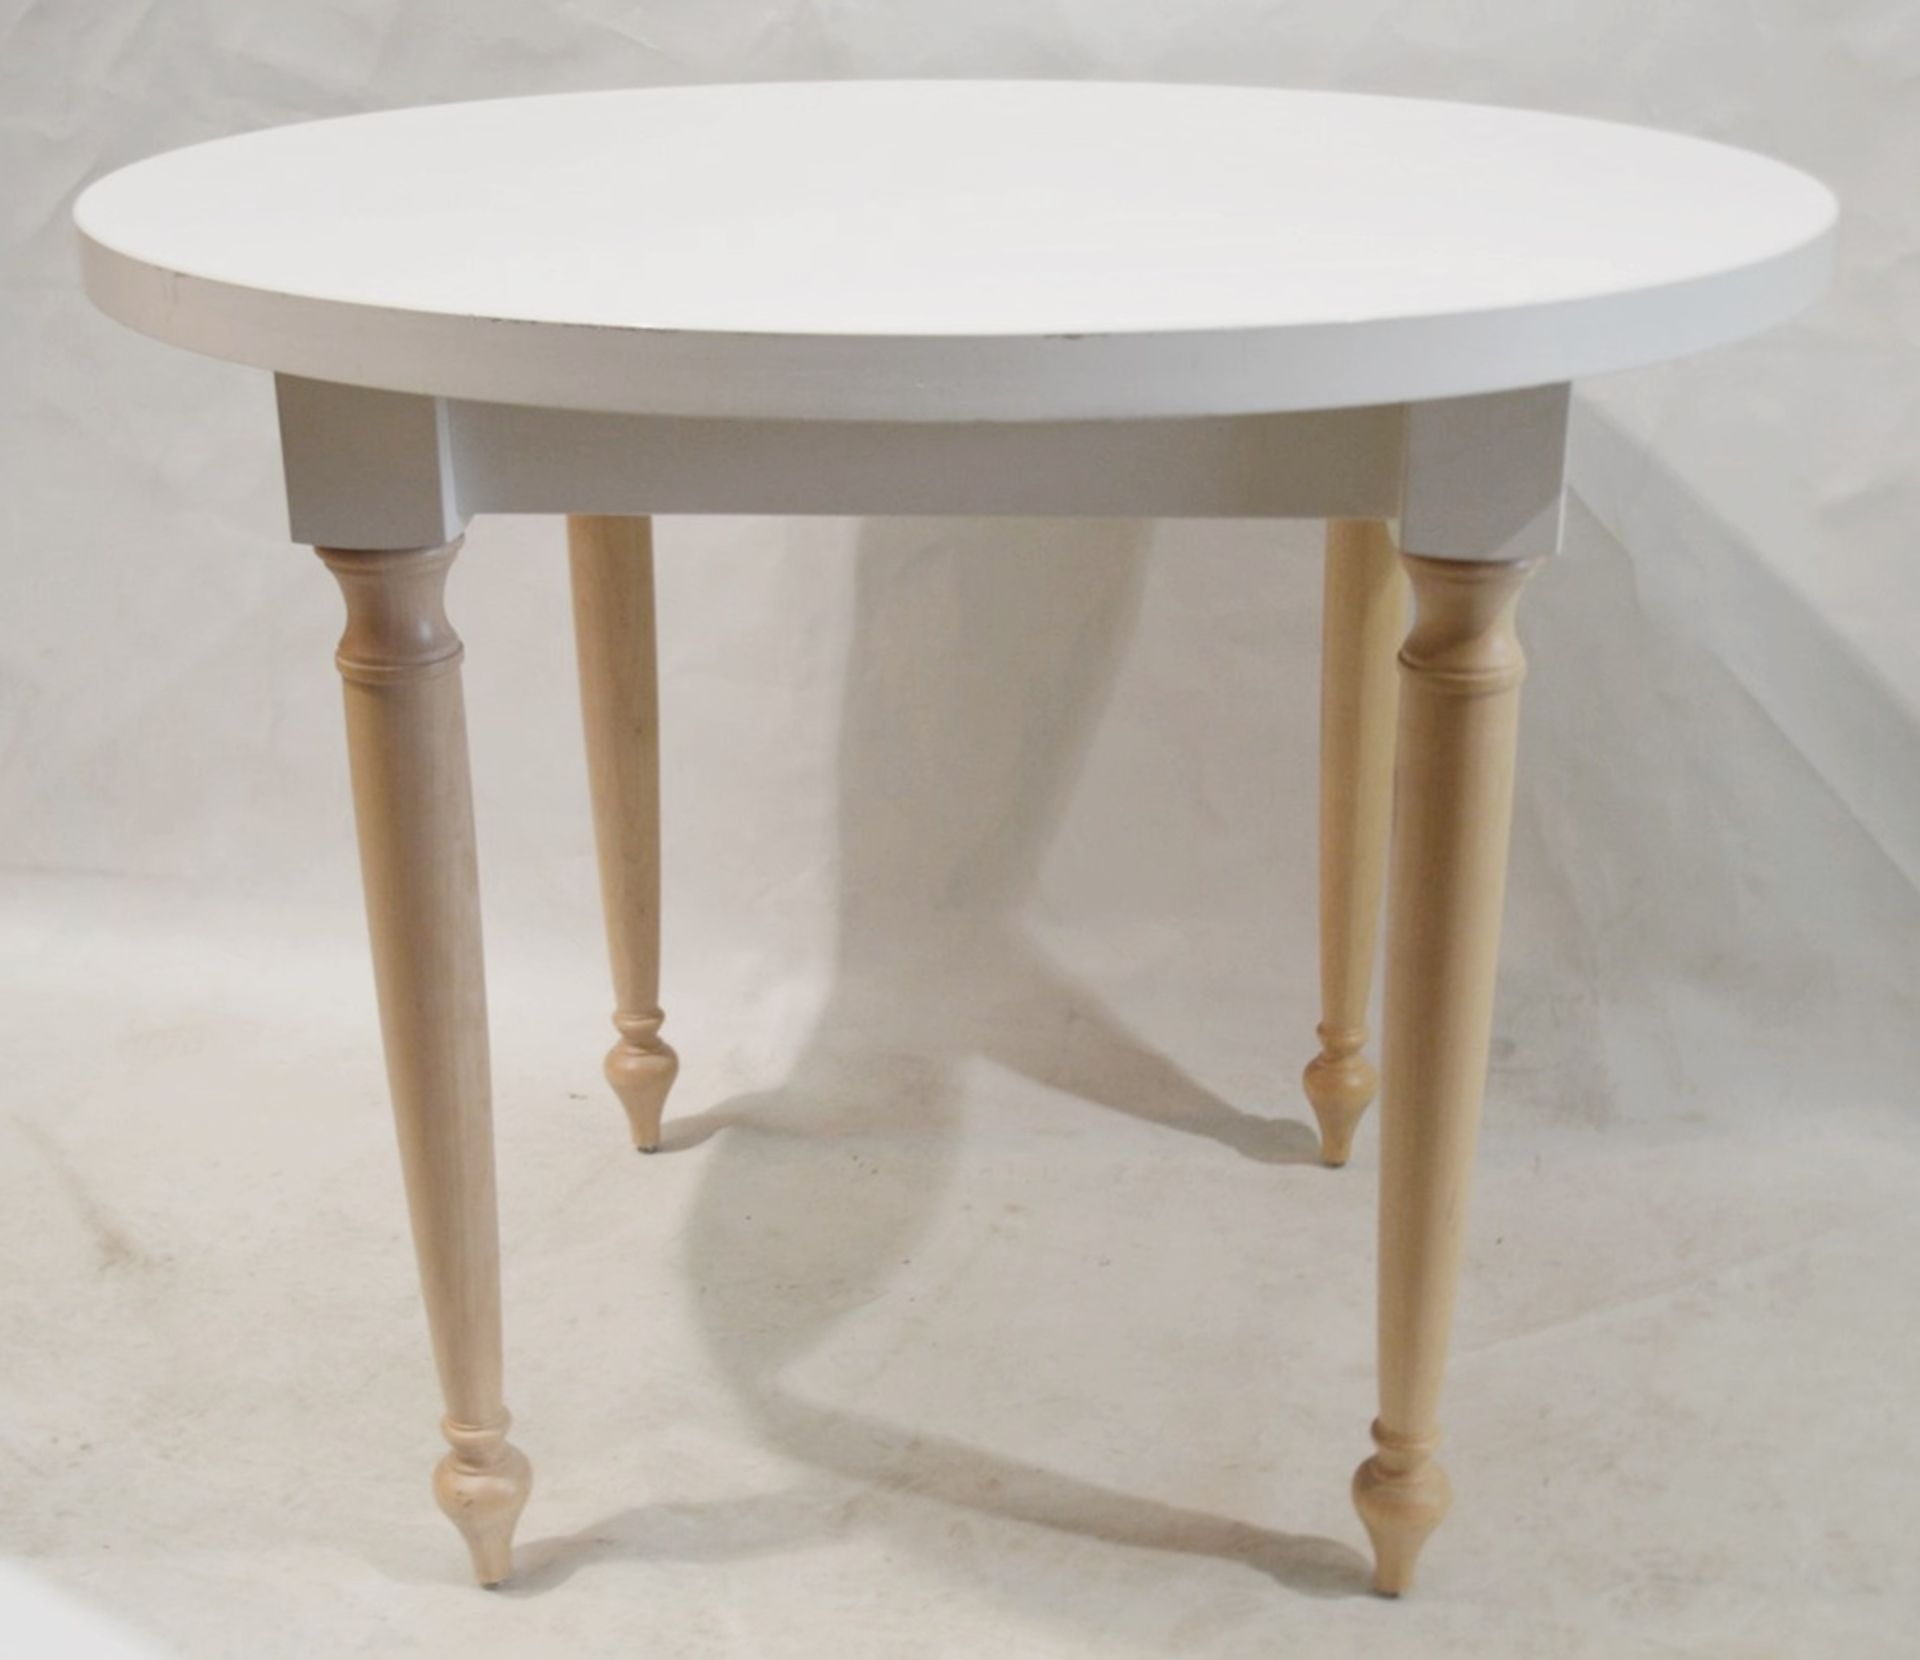 3 x Round Event Tables - Each Features Attractive Turned Legs In Beech Wood - Ex-Display - Image 2 of 4